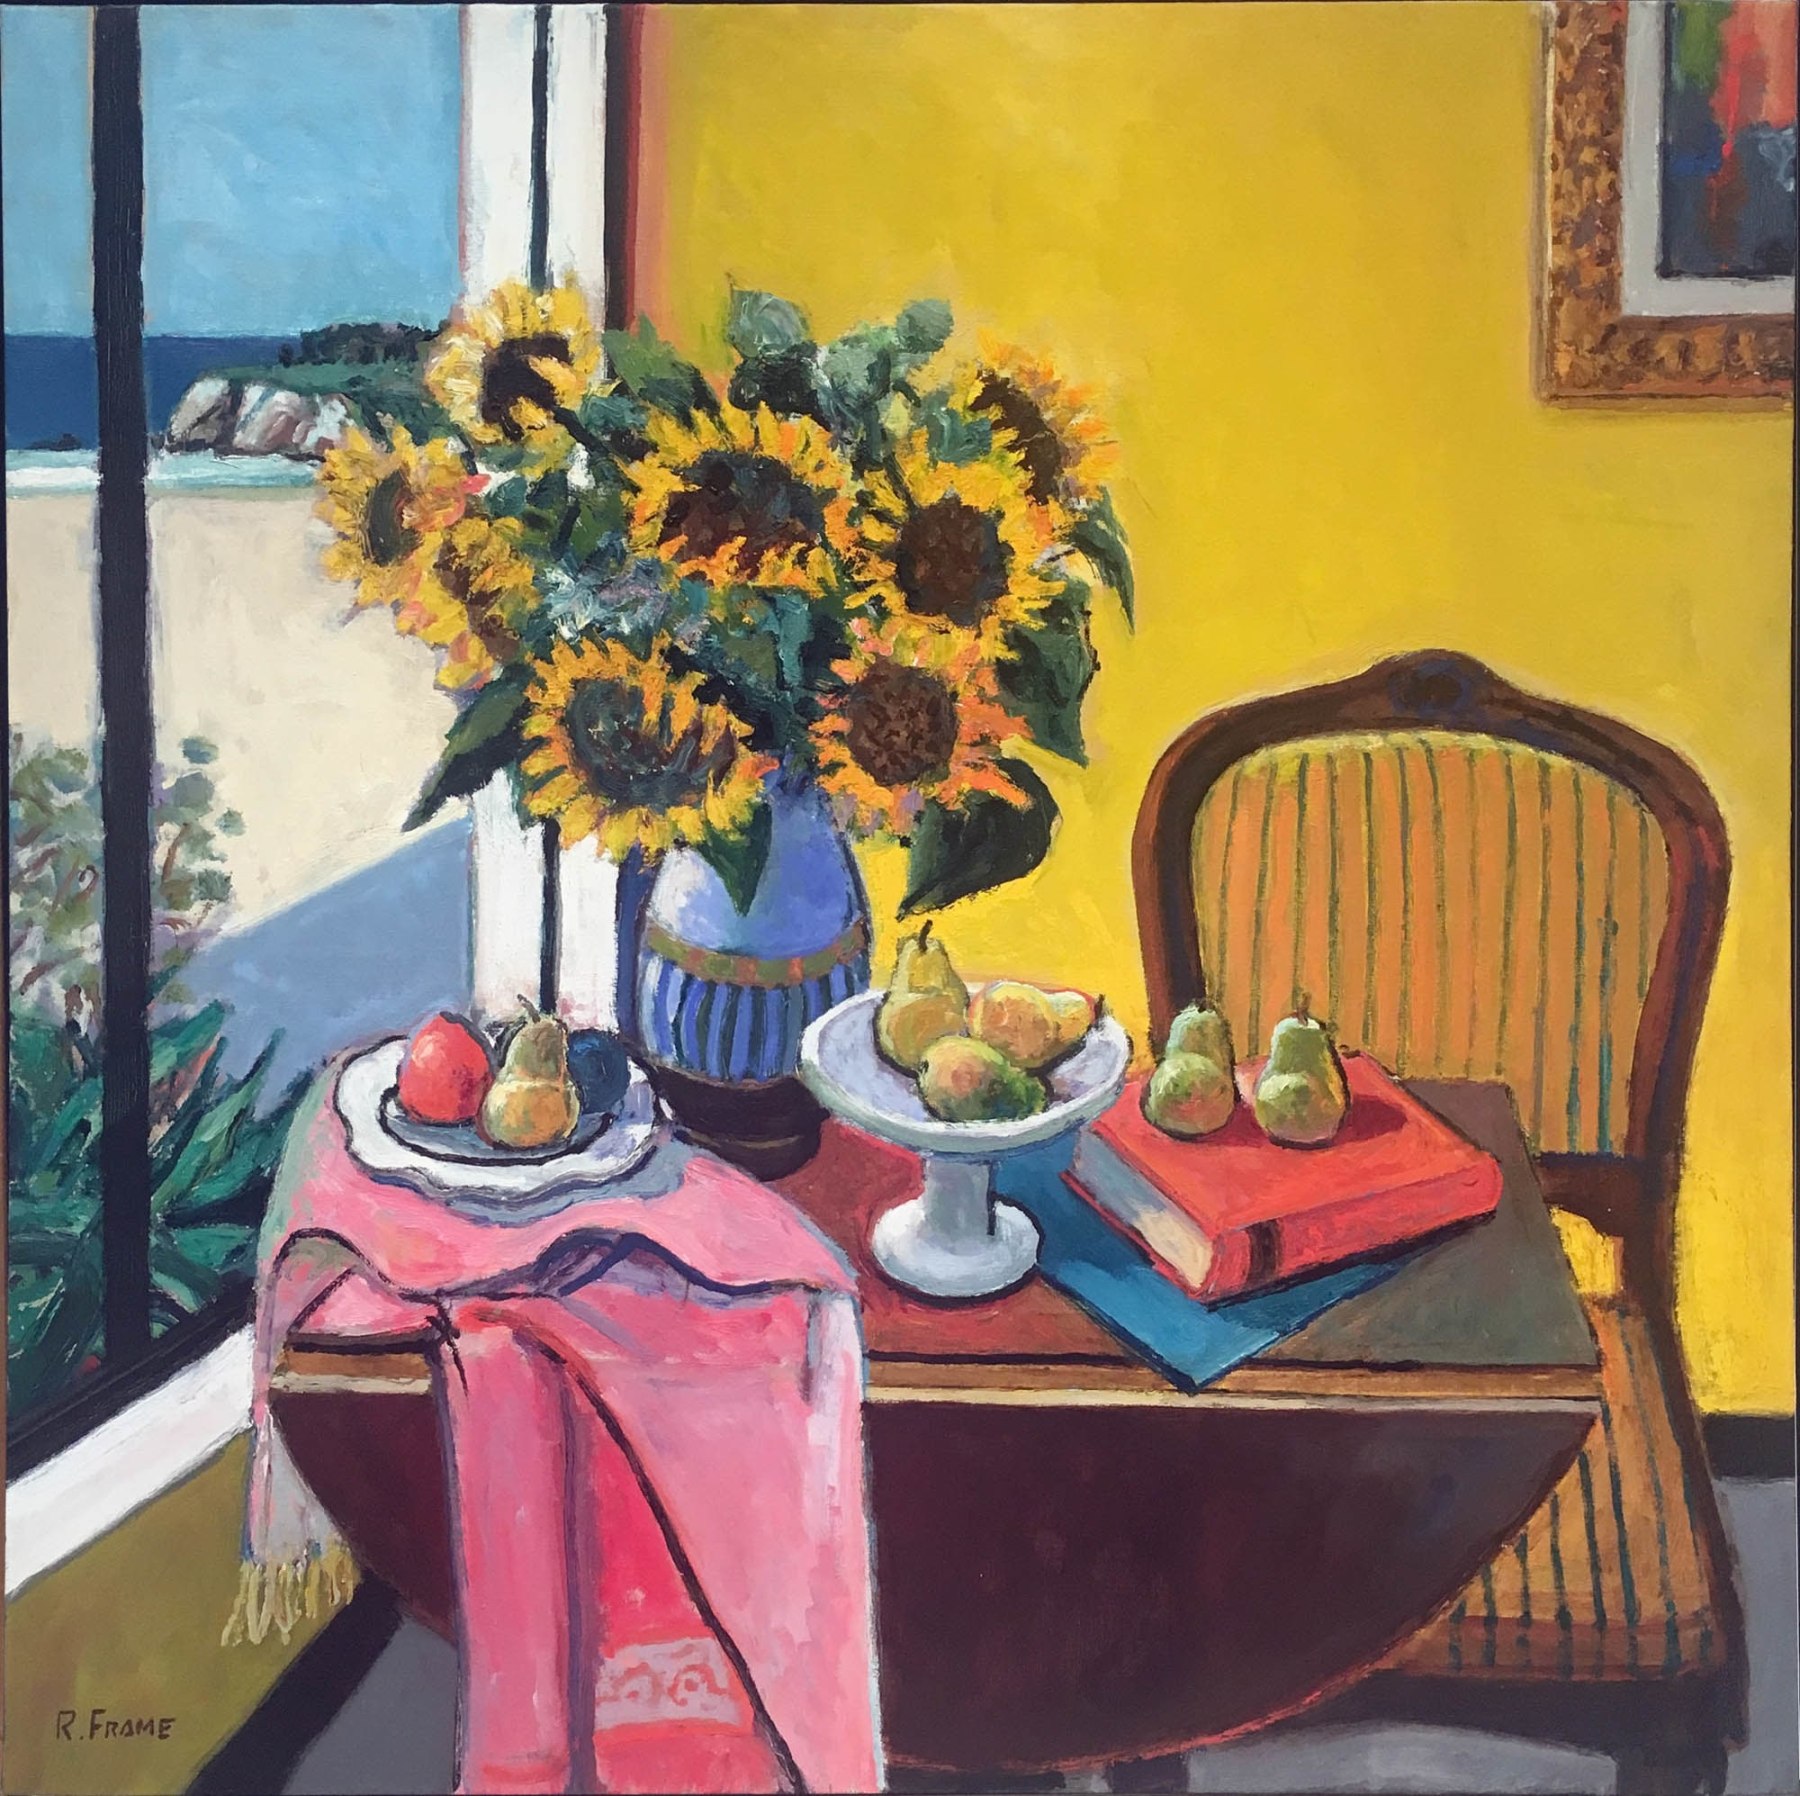 Robert Frame, Sunflowers in a Yellow Room, c.1975